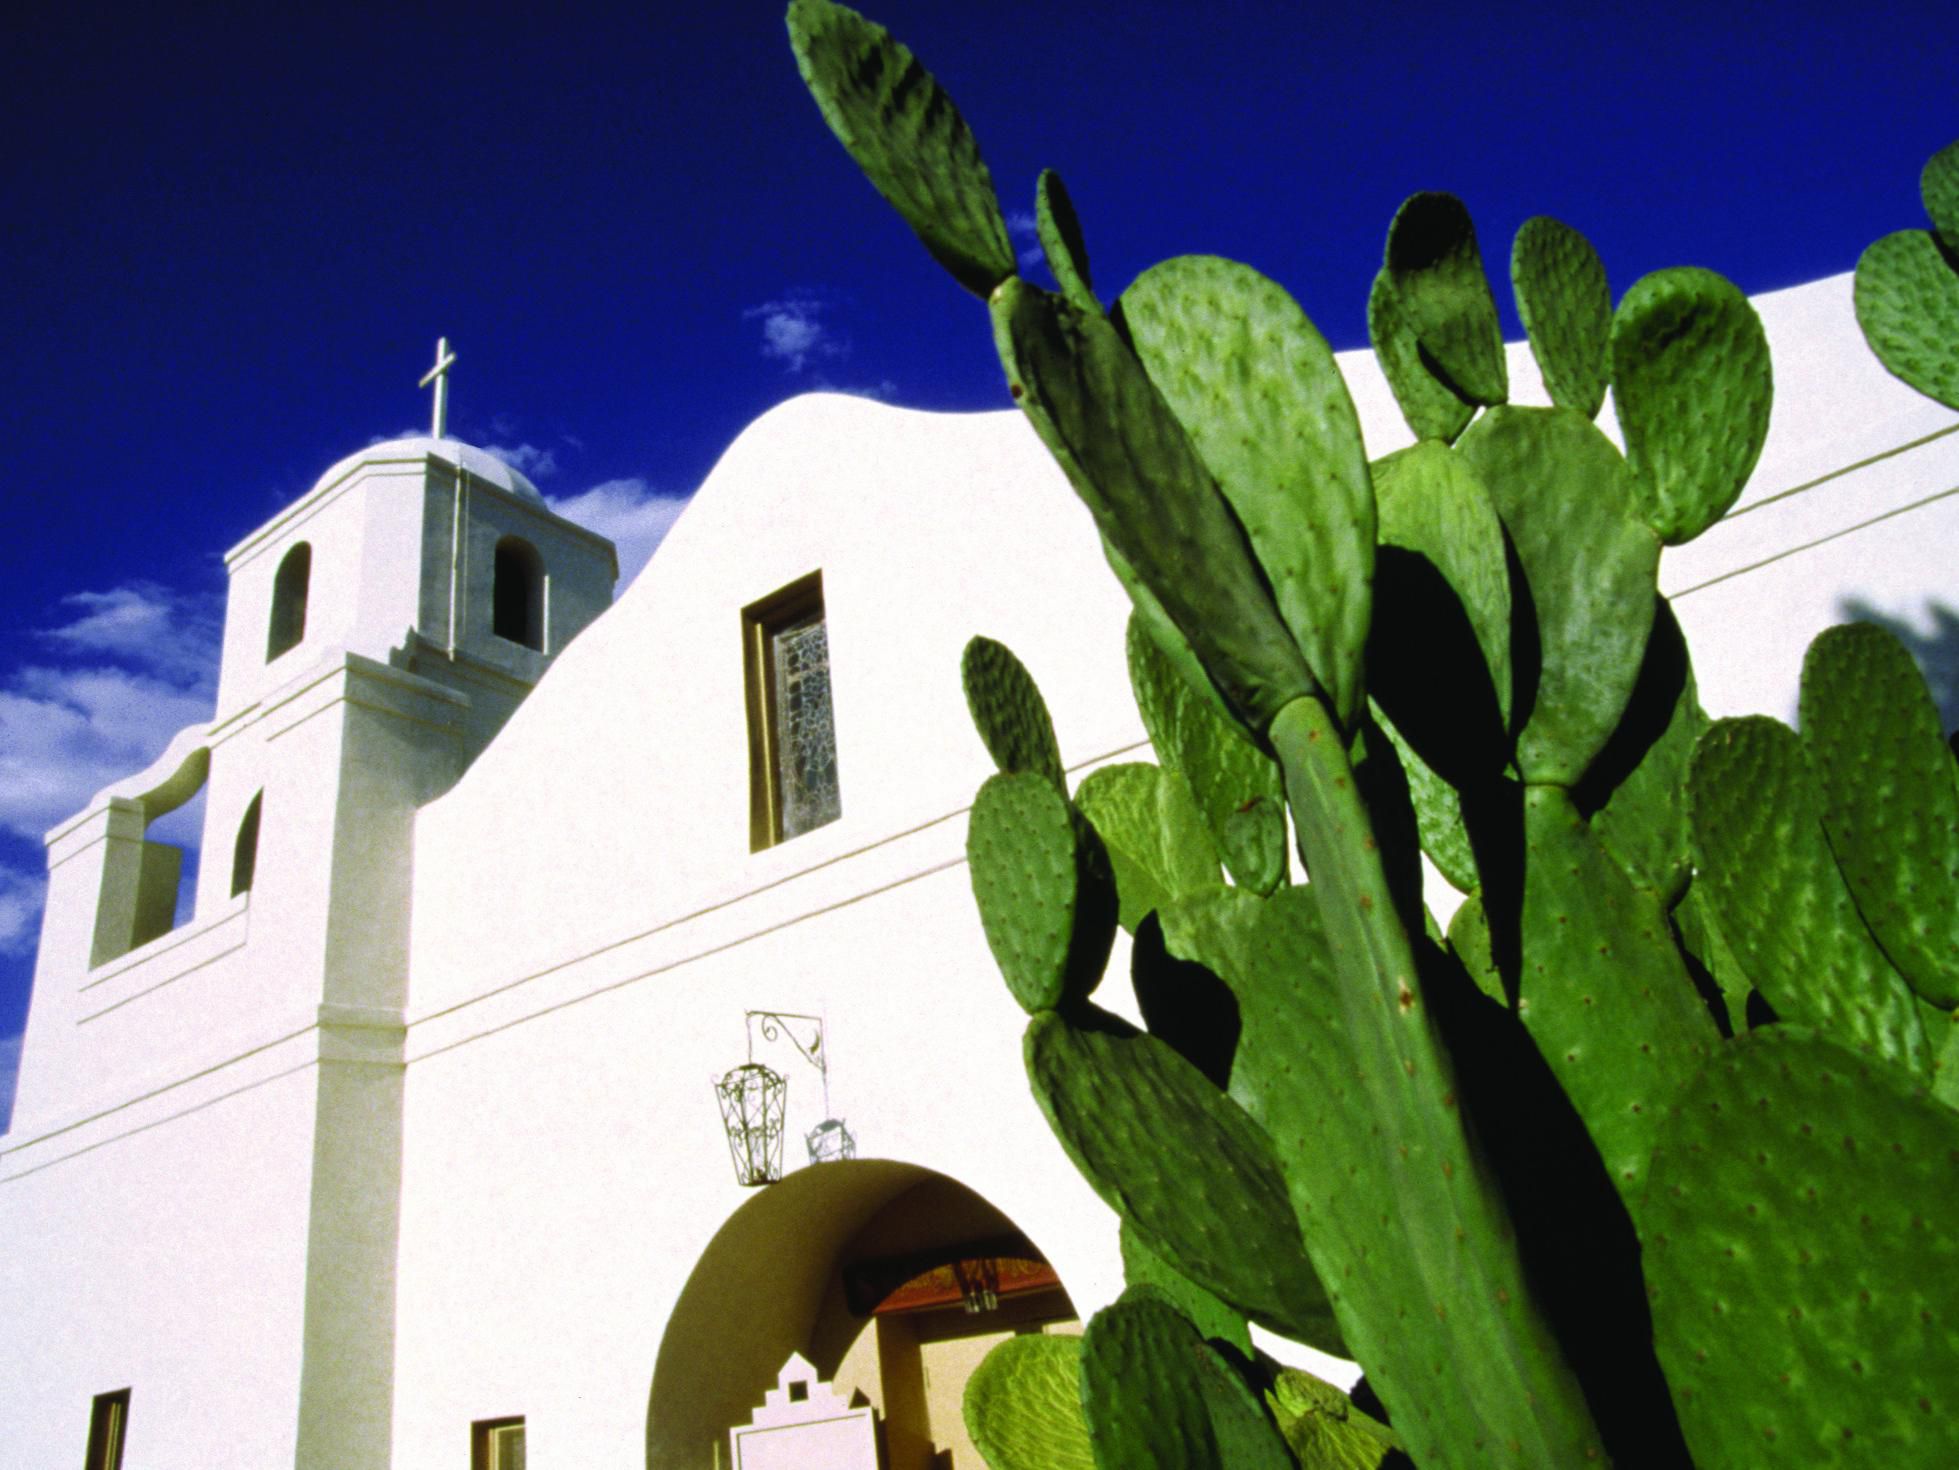 The Mission in Old Town Scottsdale